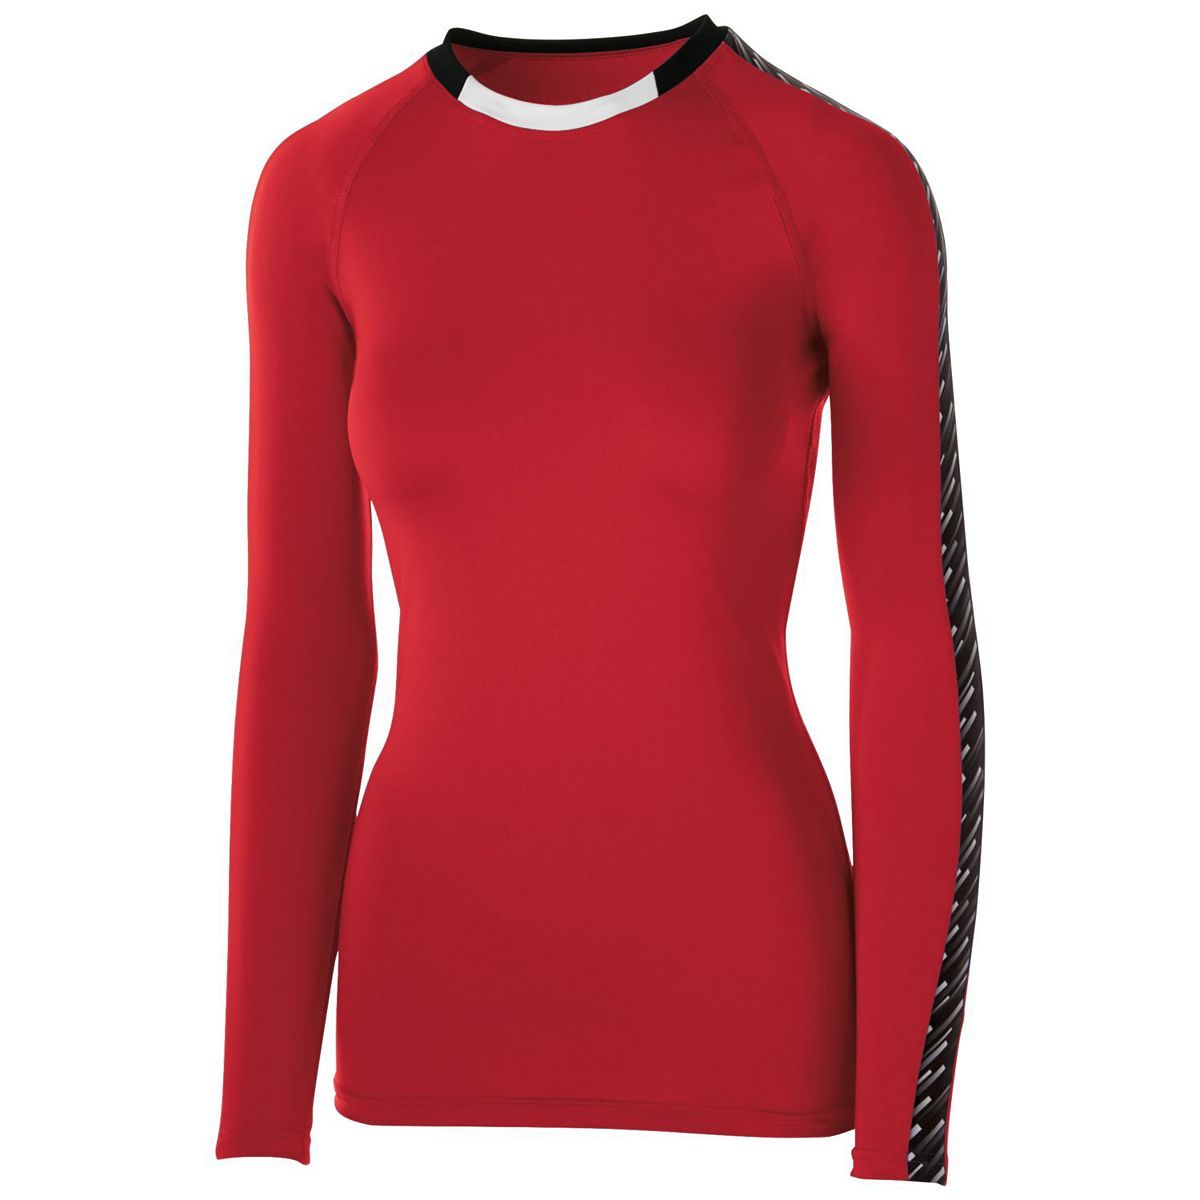 High 5 Ladies Spectrum Long Sleeve Jersey in Scarlet/Black/White  -Part of the Ladies, Ladies-Jersey, High5-Products, Volleyball, Shirts product lines at KanaleyCreations.com